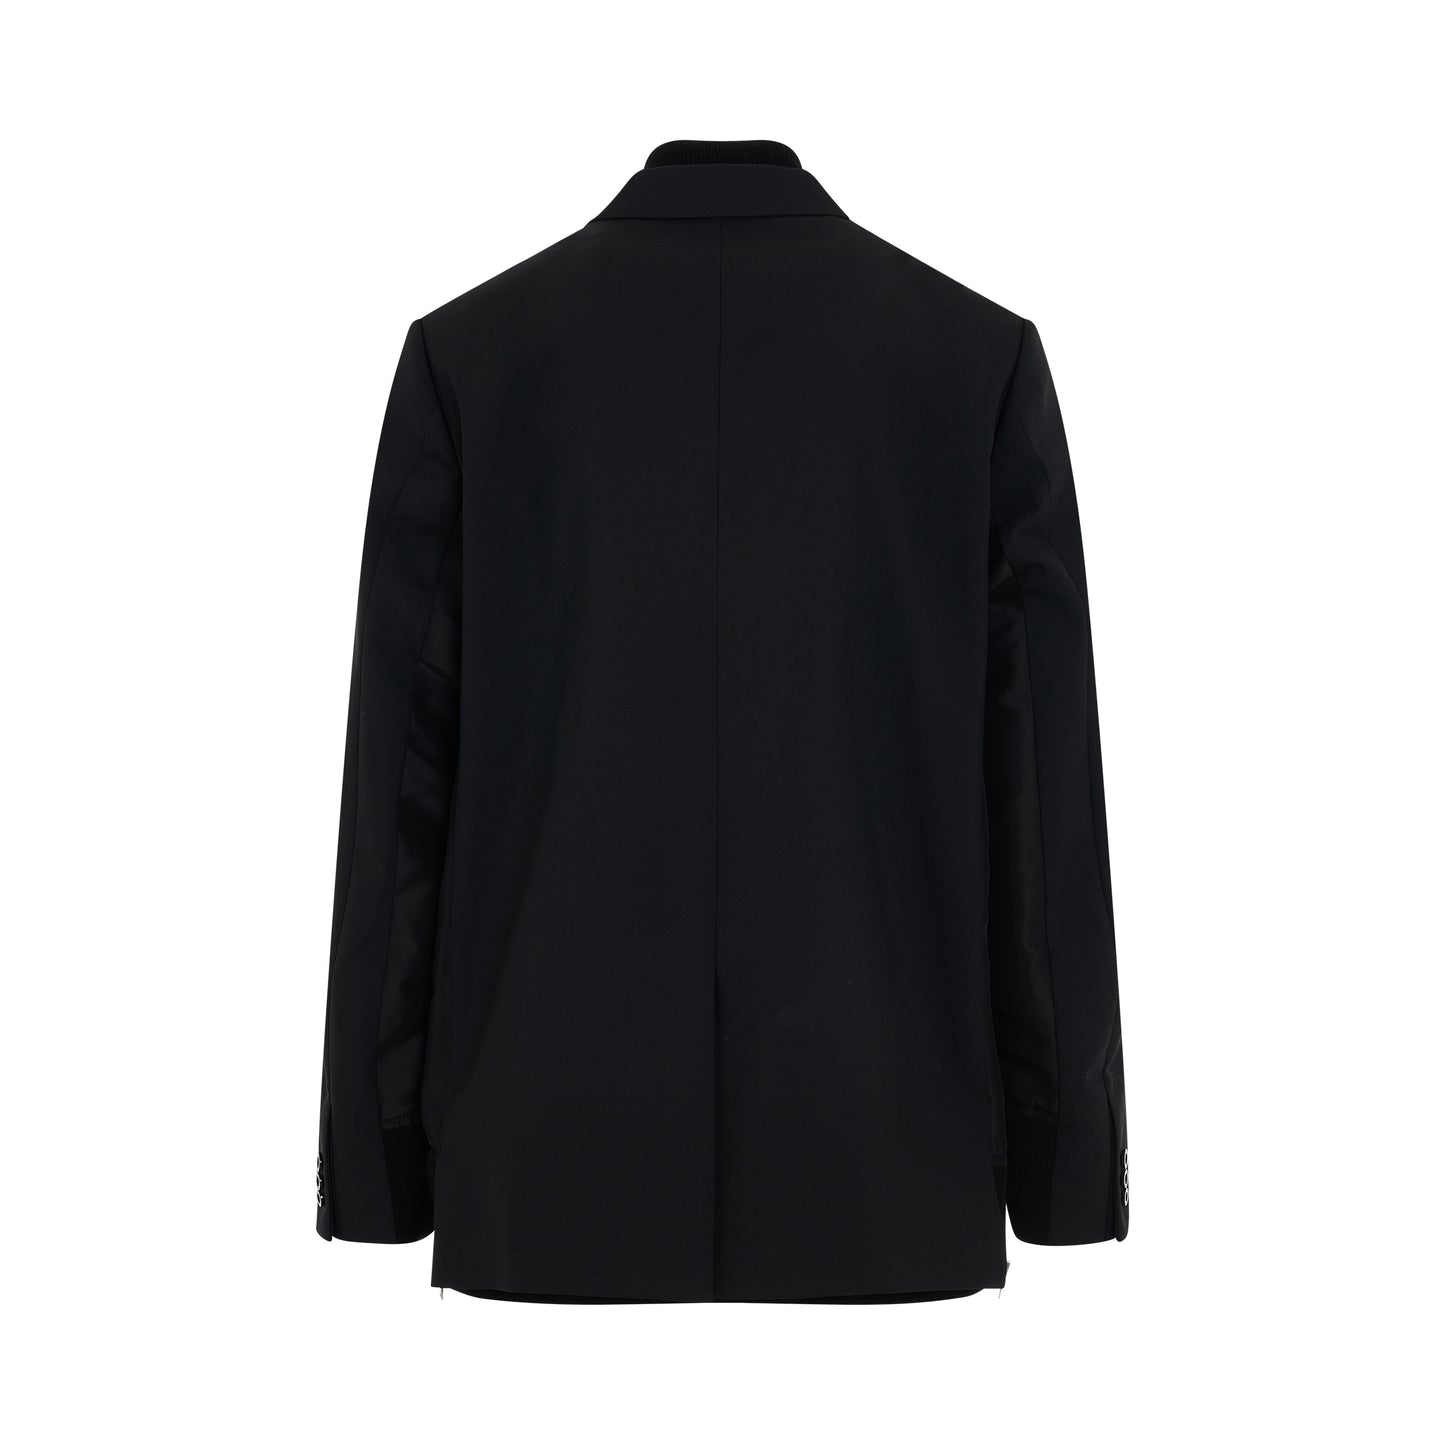 Suiting x Nylon Twill Jacket in Black